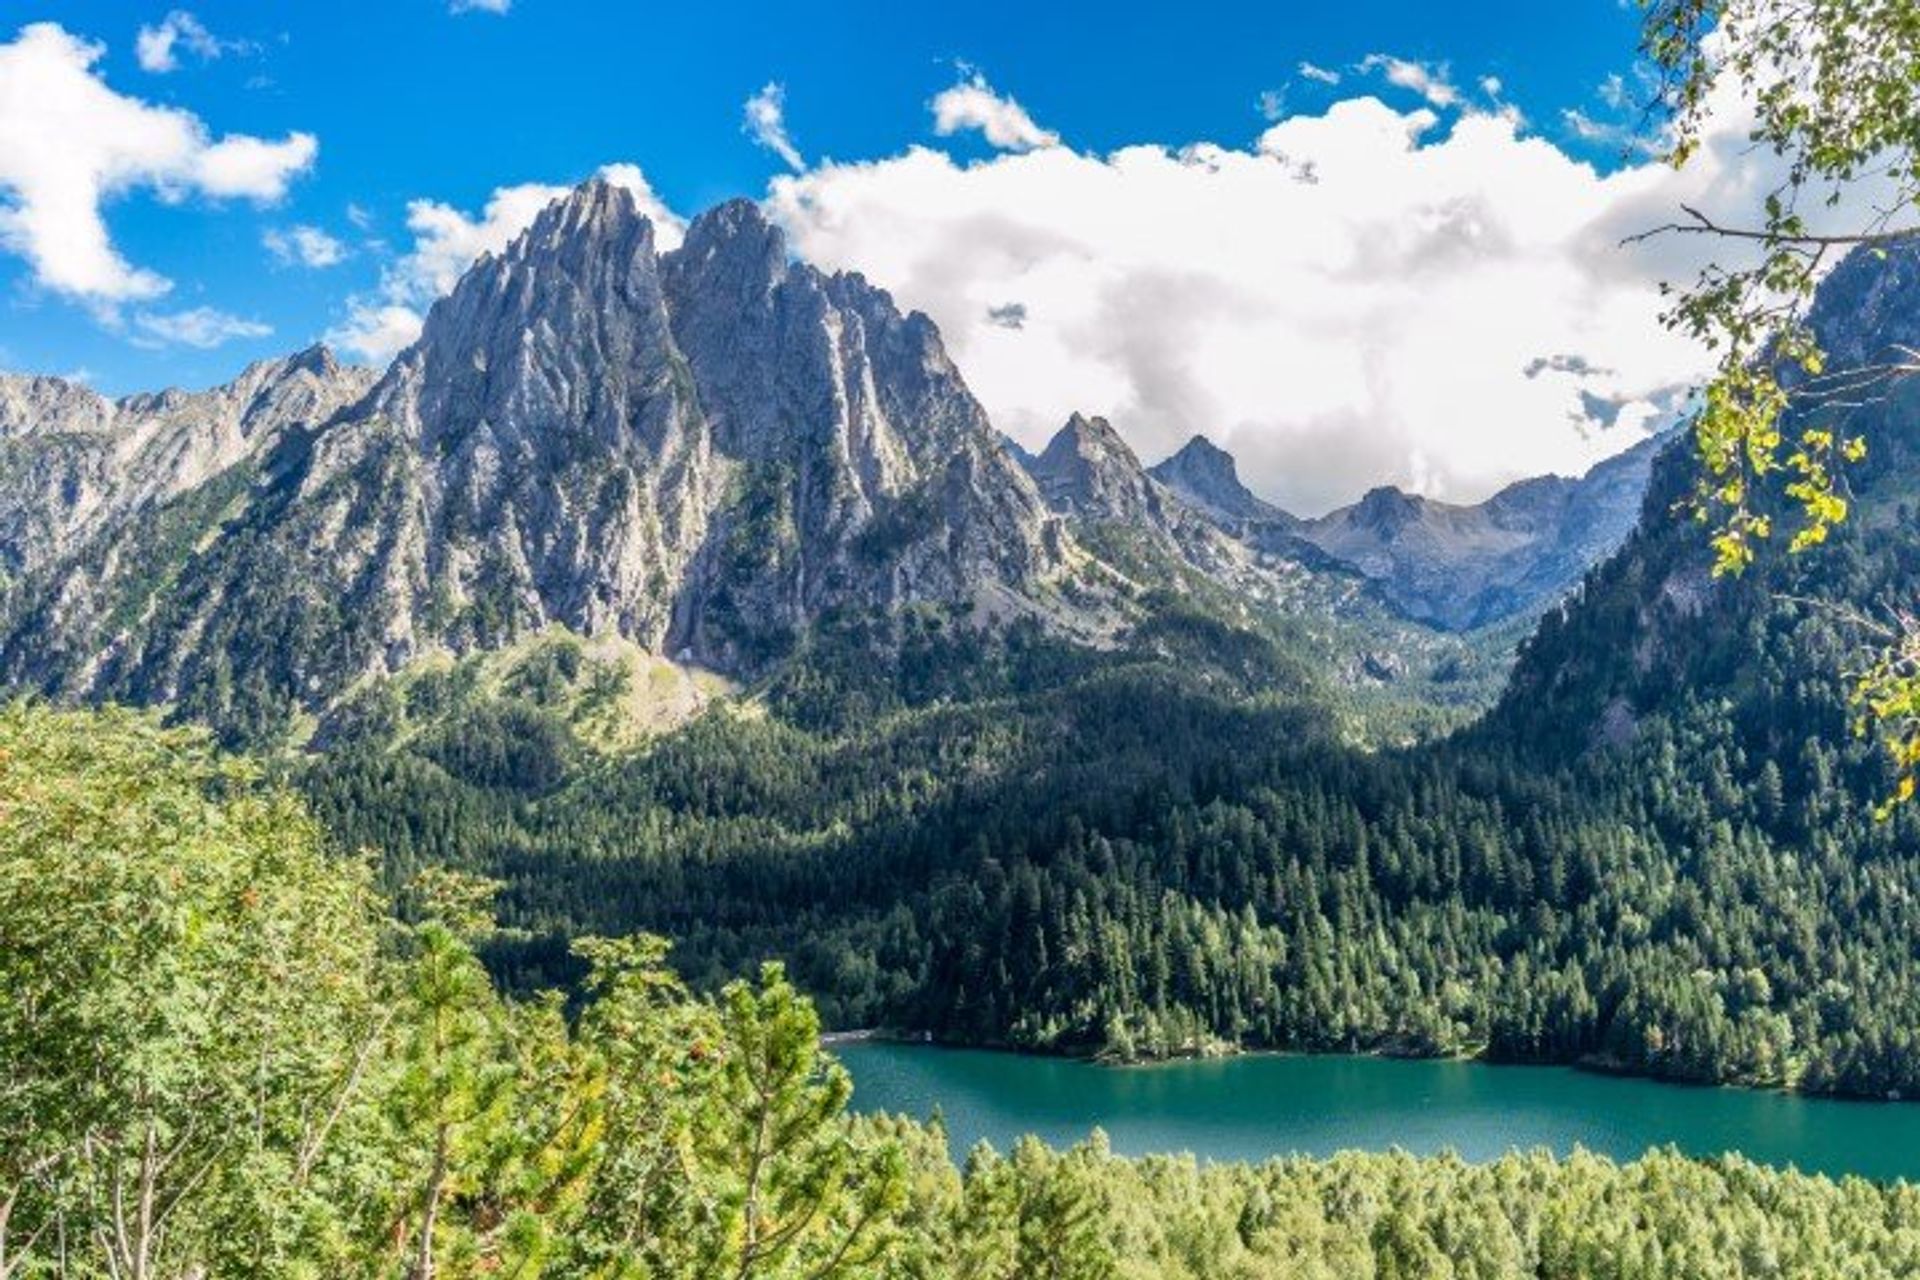 The Enchanted Mountain in St. Maurici, Lleida, is Catalonia's only National Park